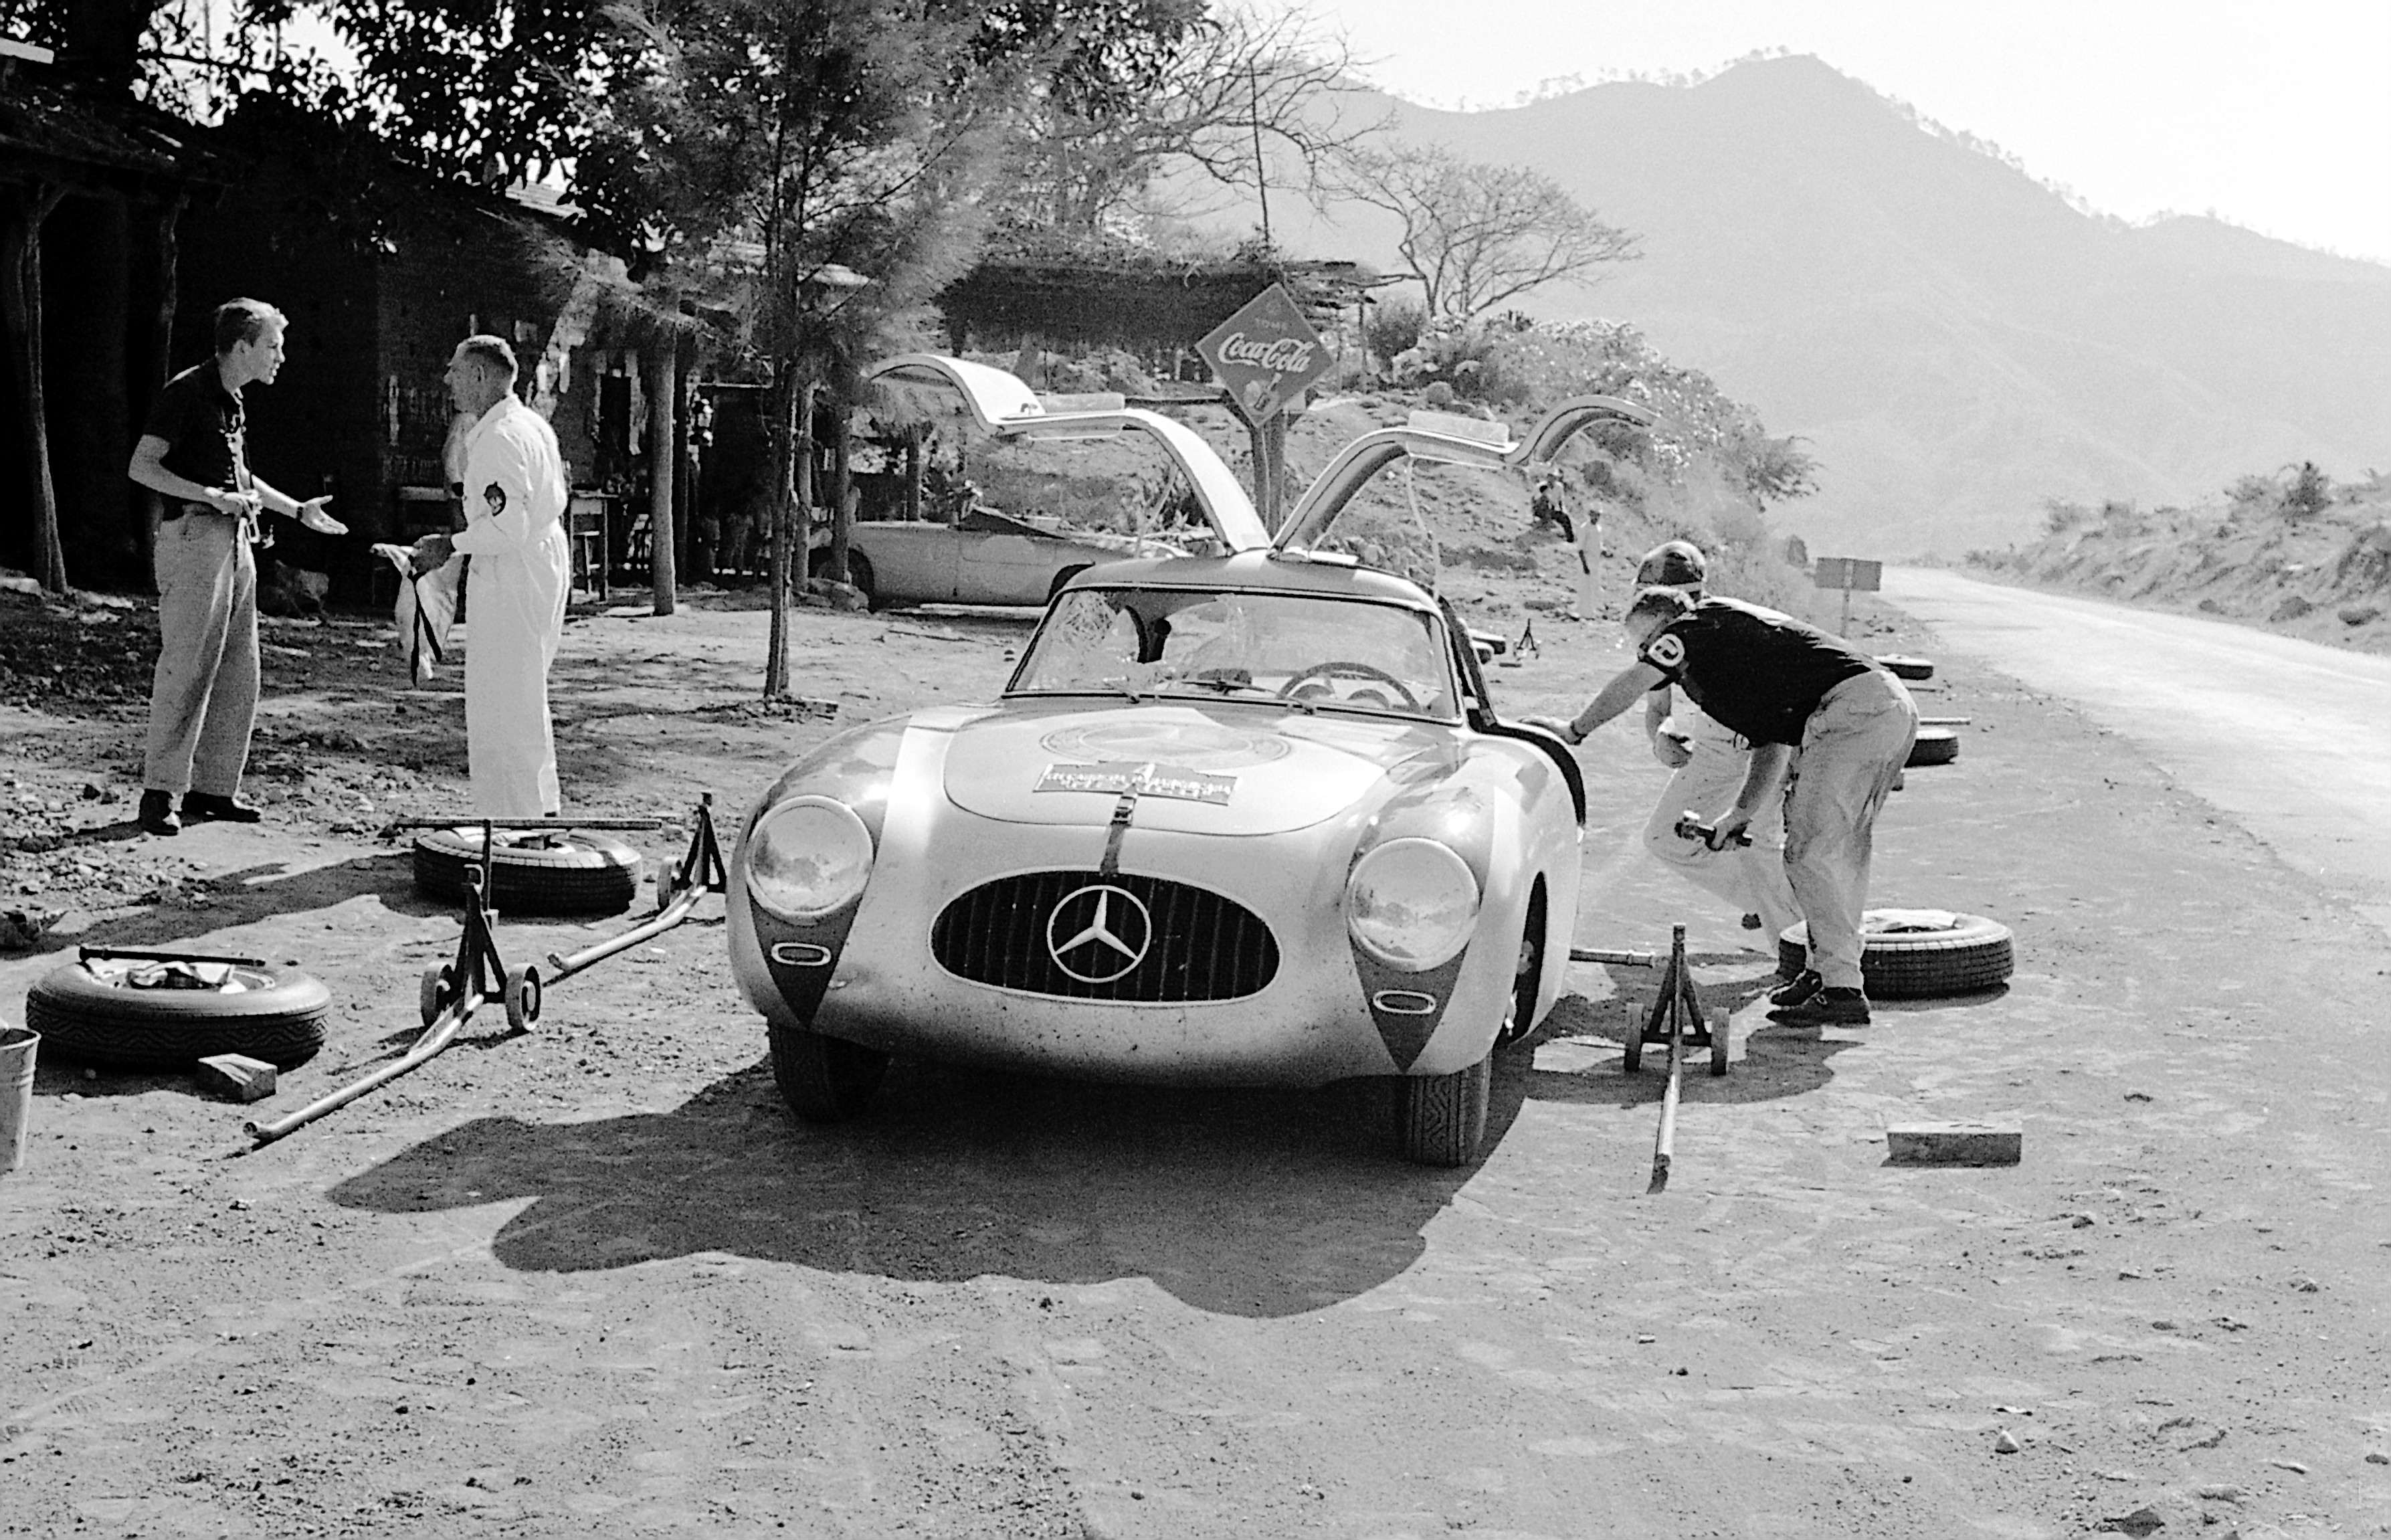 The Mercedes 300SL of Karl Kling with its smashed windscreen - after hitting a vulture during the 1952 Carrera Panamericana race